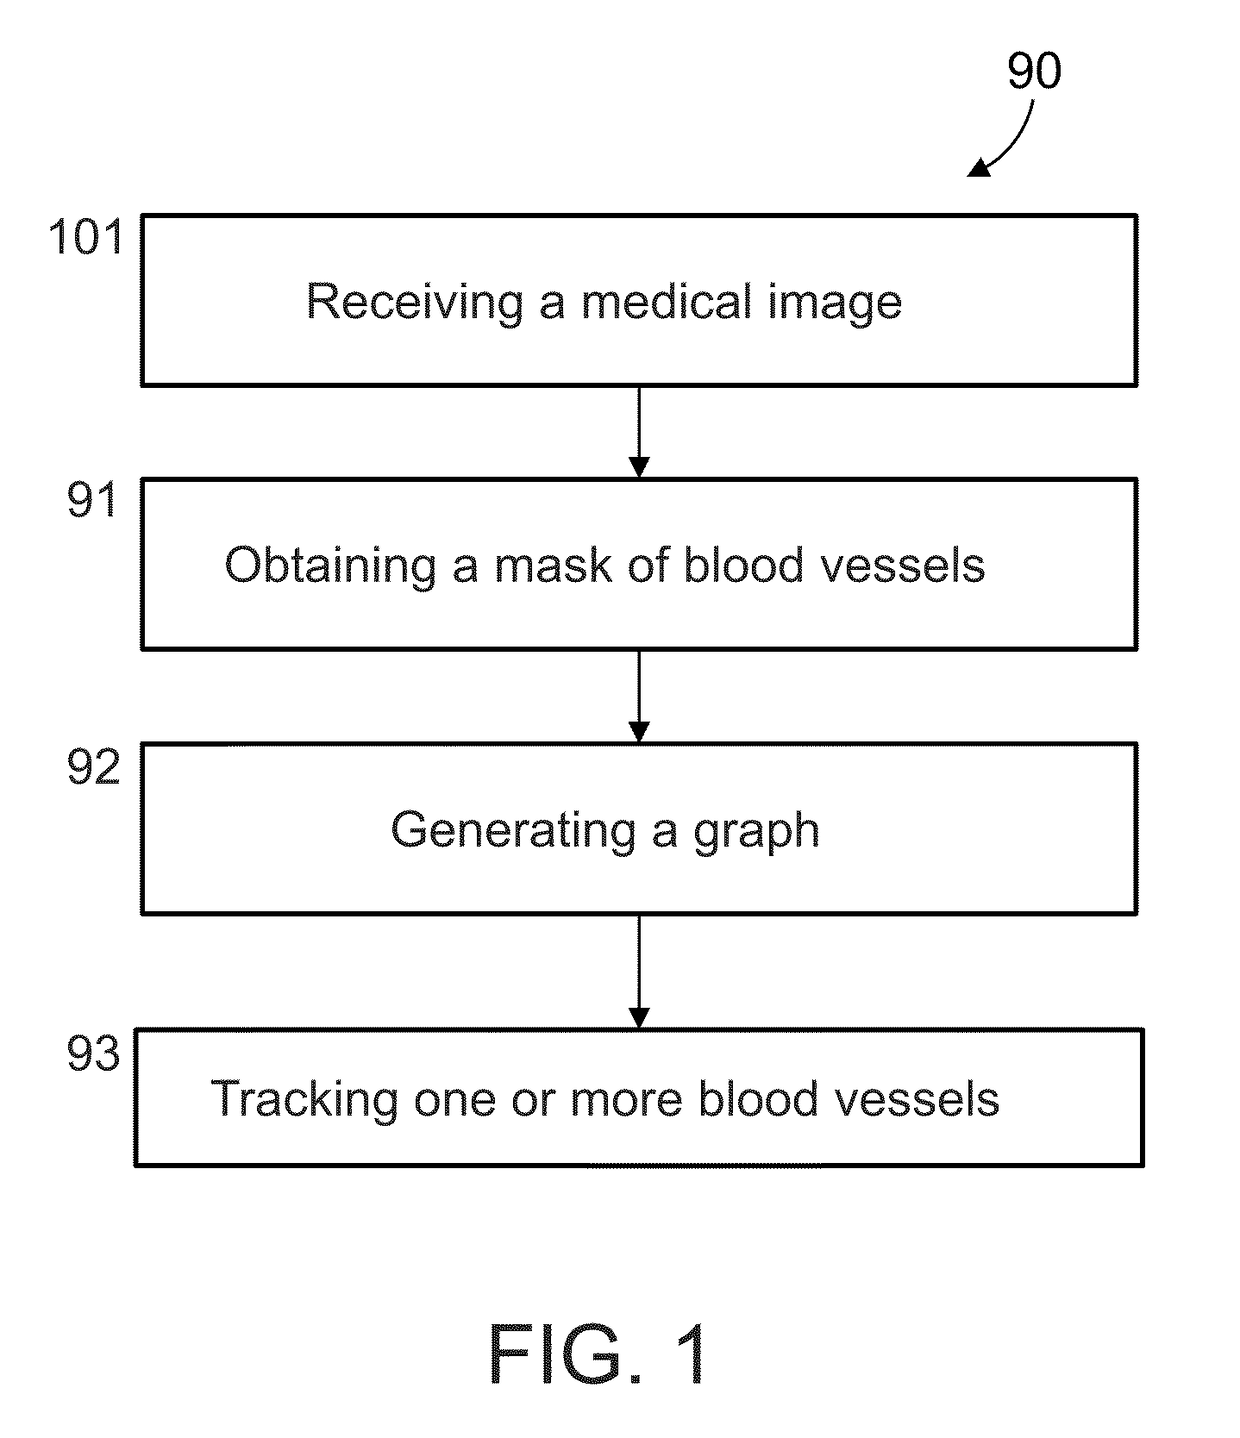 Method and system for blood vessel segmentation and classification